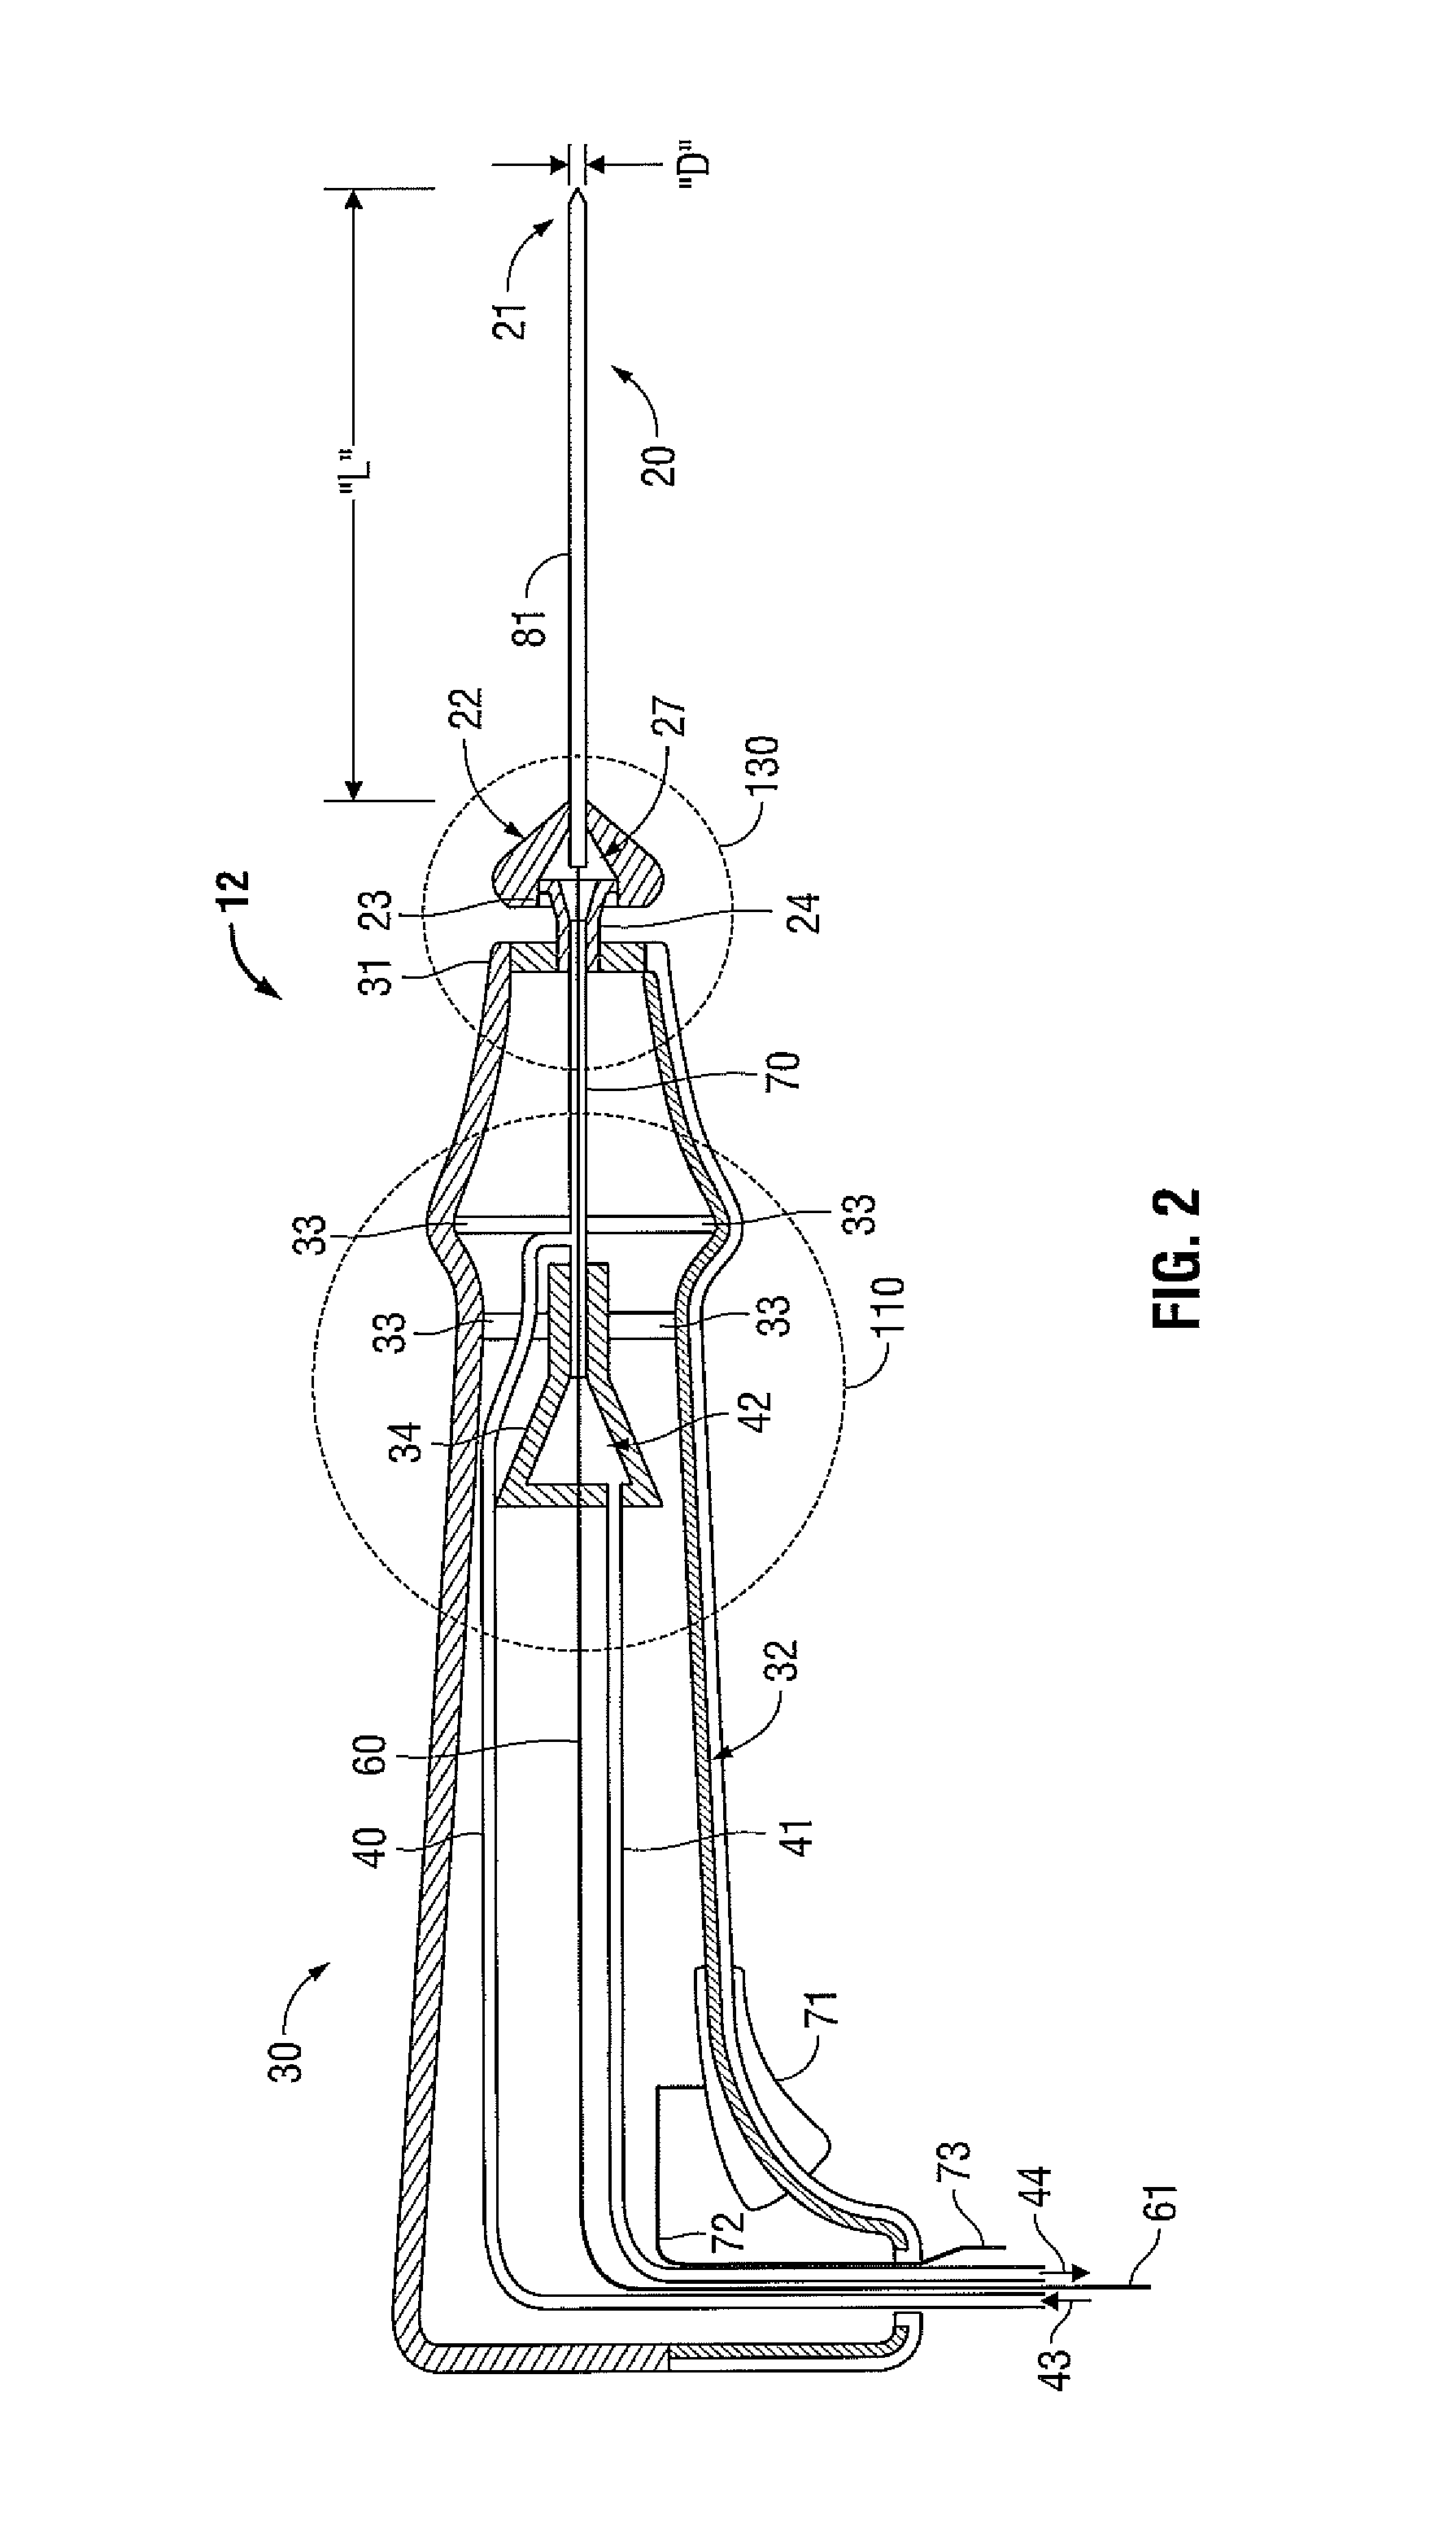 Microwave ablation instrument with interchangeable antenna probe